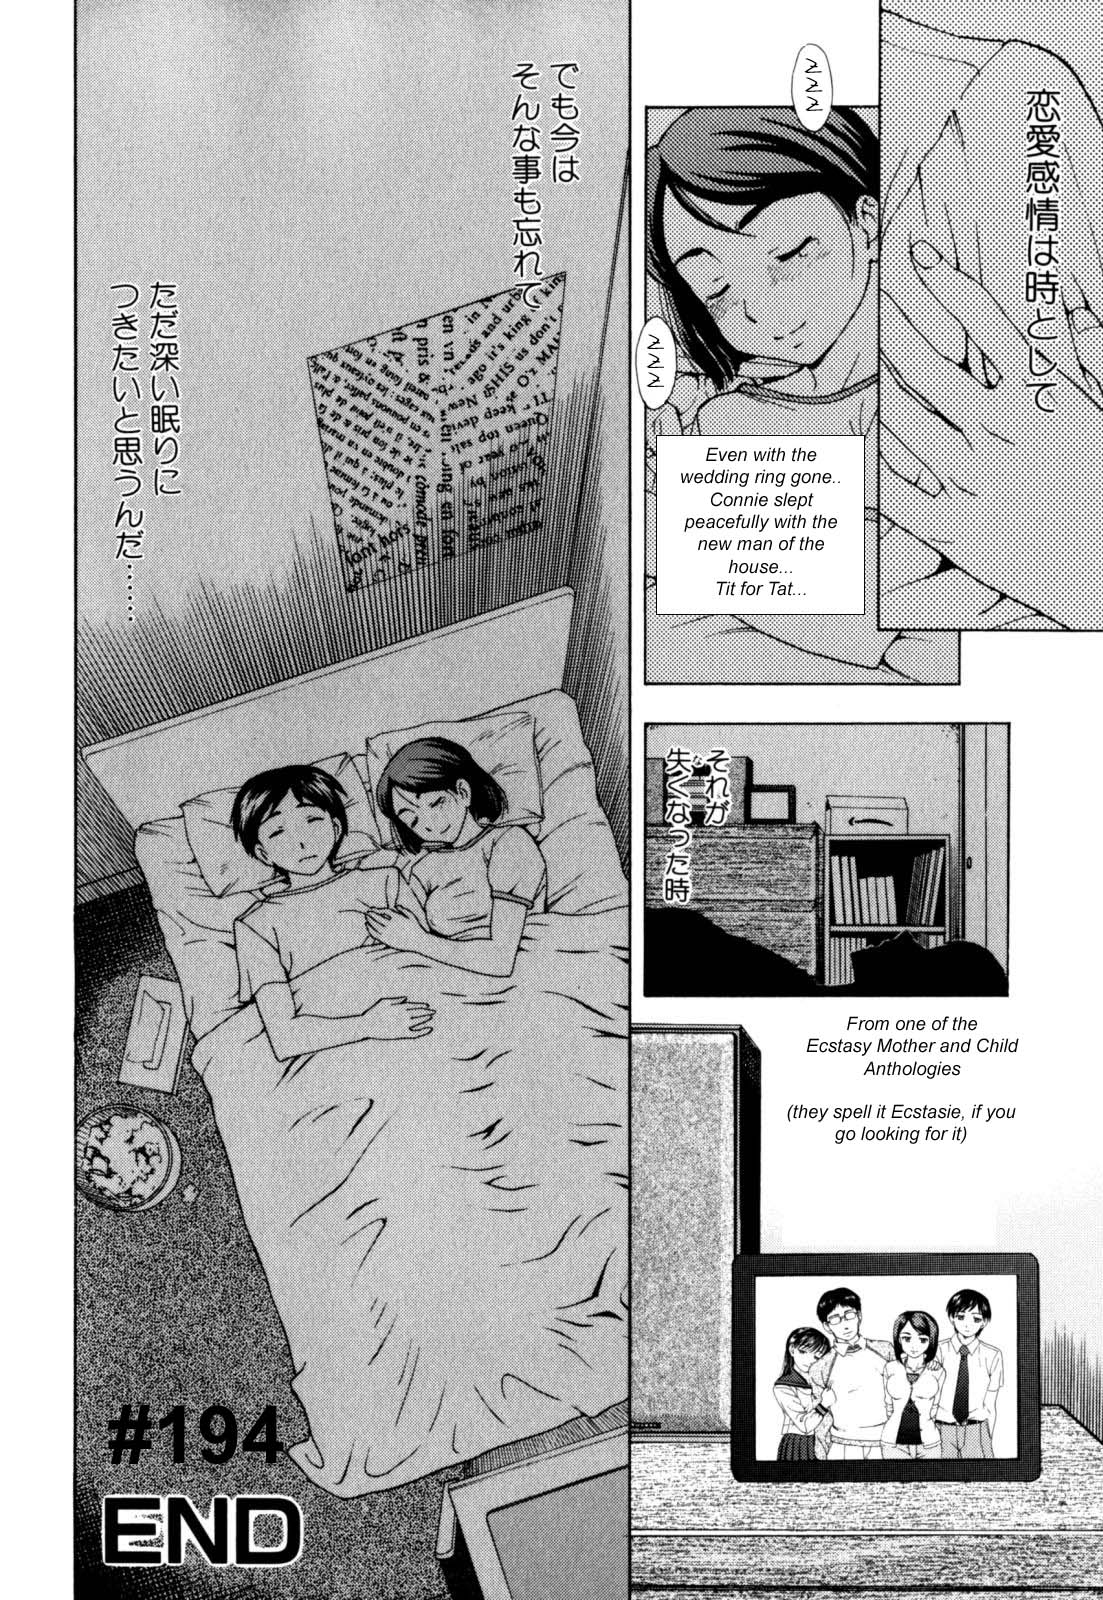 Tit for Tat for Tommy [English] [Rewrite] [olddog51] page 14 full